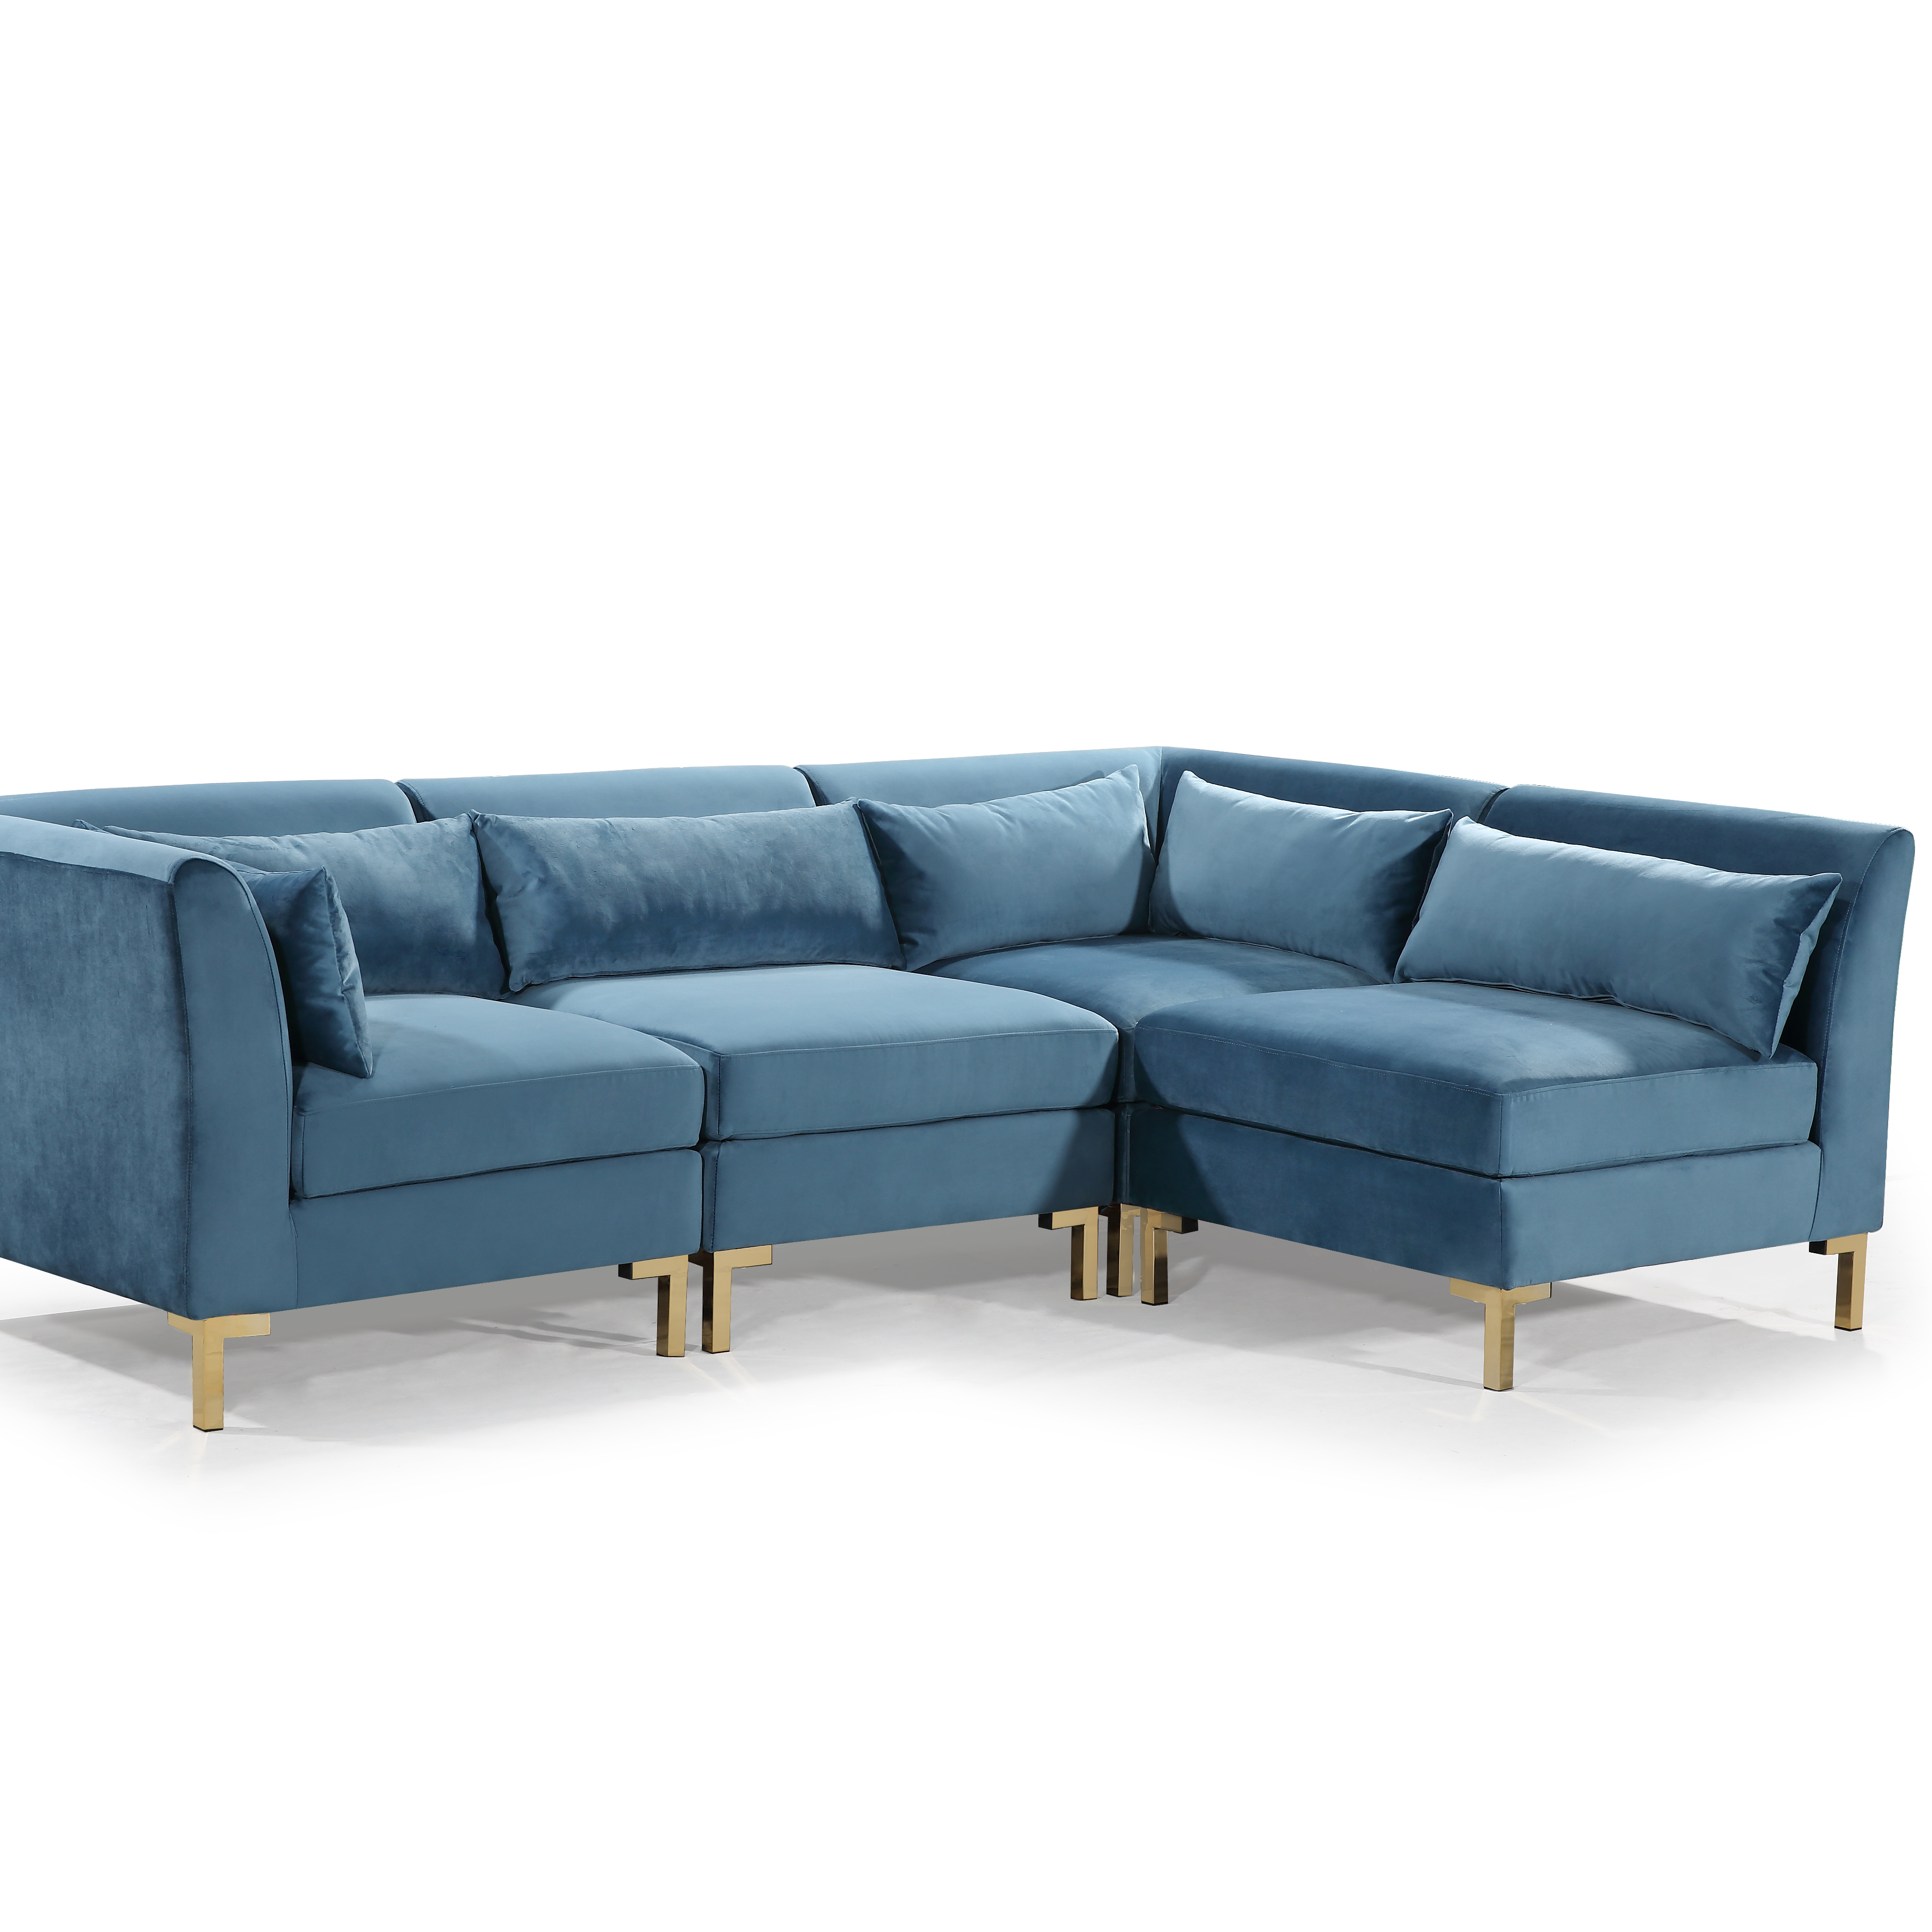 Greco Modular Chaise Sectional Sofa Solid Gold Tone Metal Y-Leg With 6 Throw Pillows - Teal